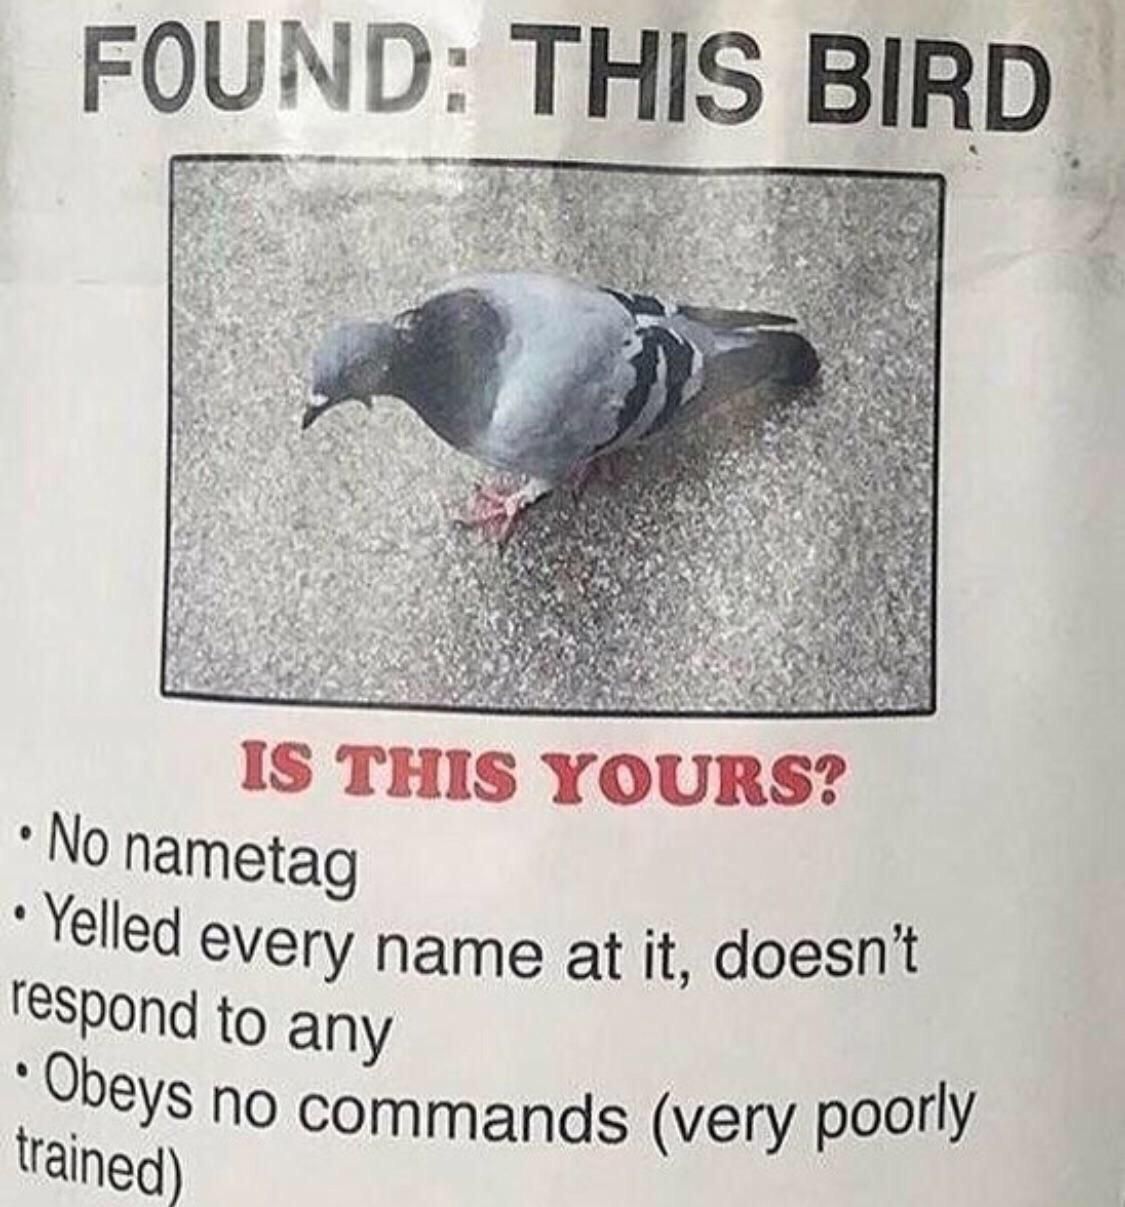 Who’s bird this ?